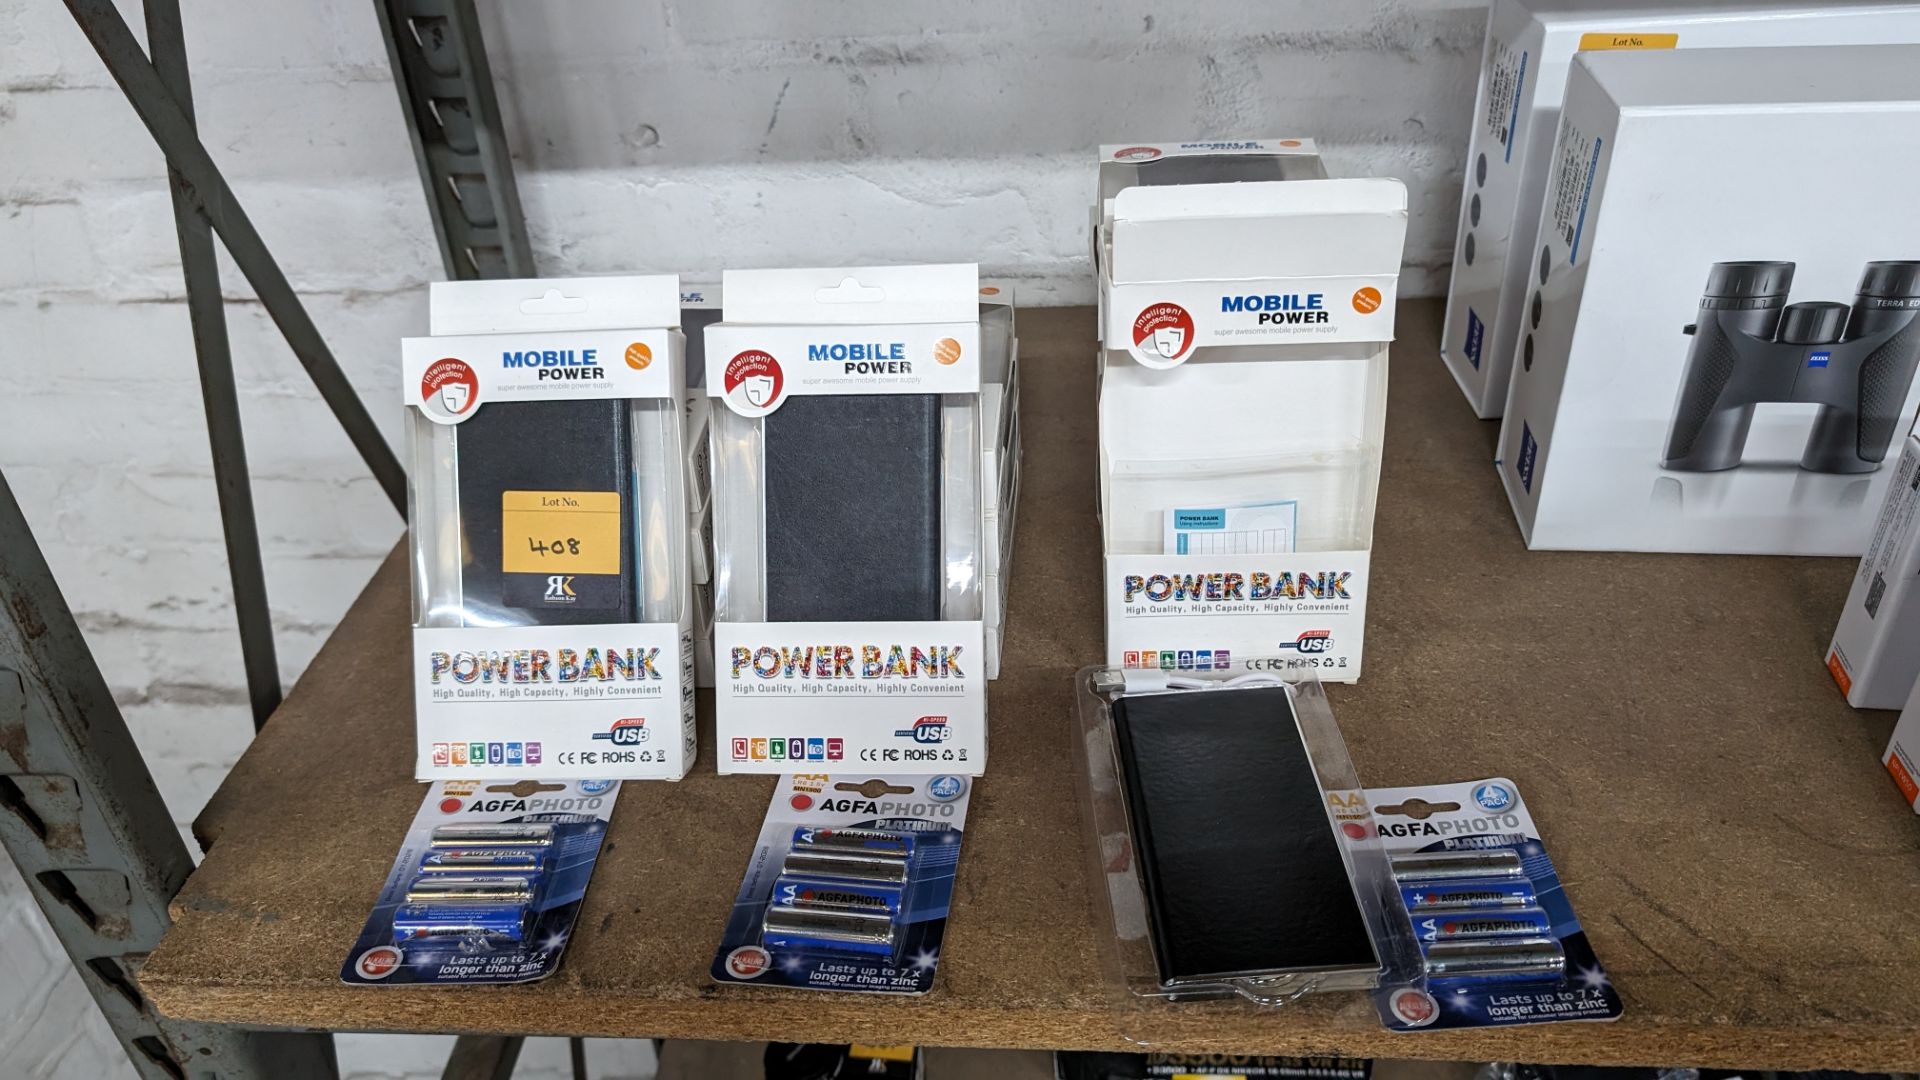 17 off mobile power banks plus 3 packs of batteries - Image 3 of 10